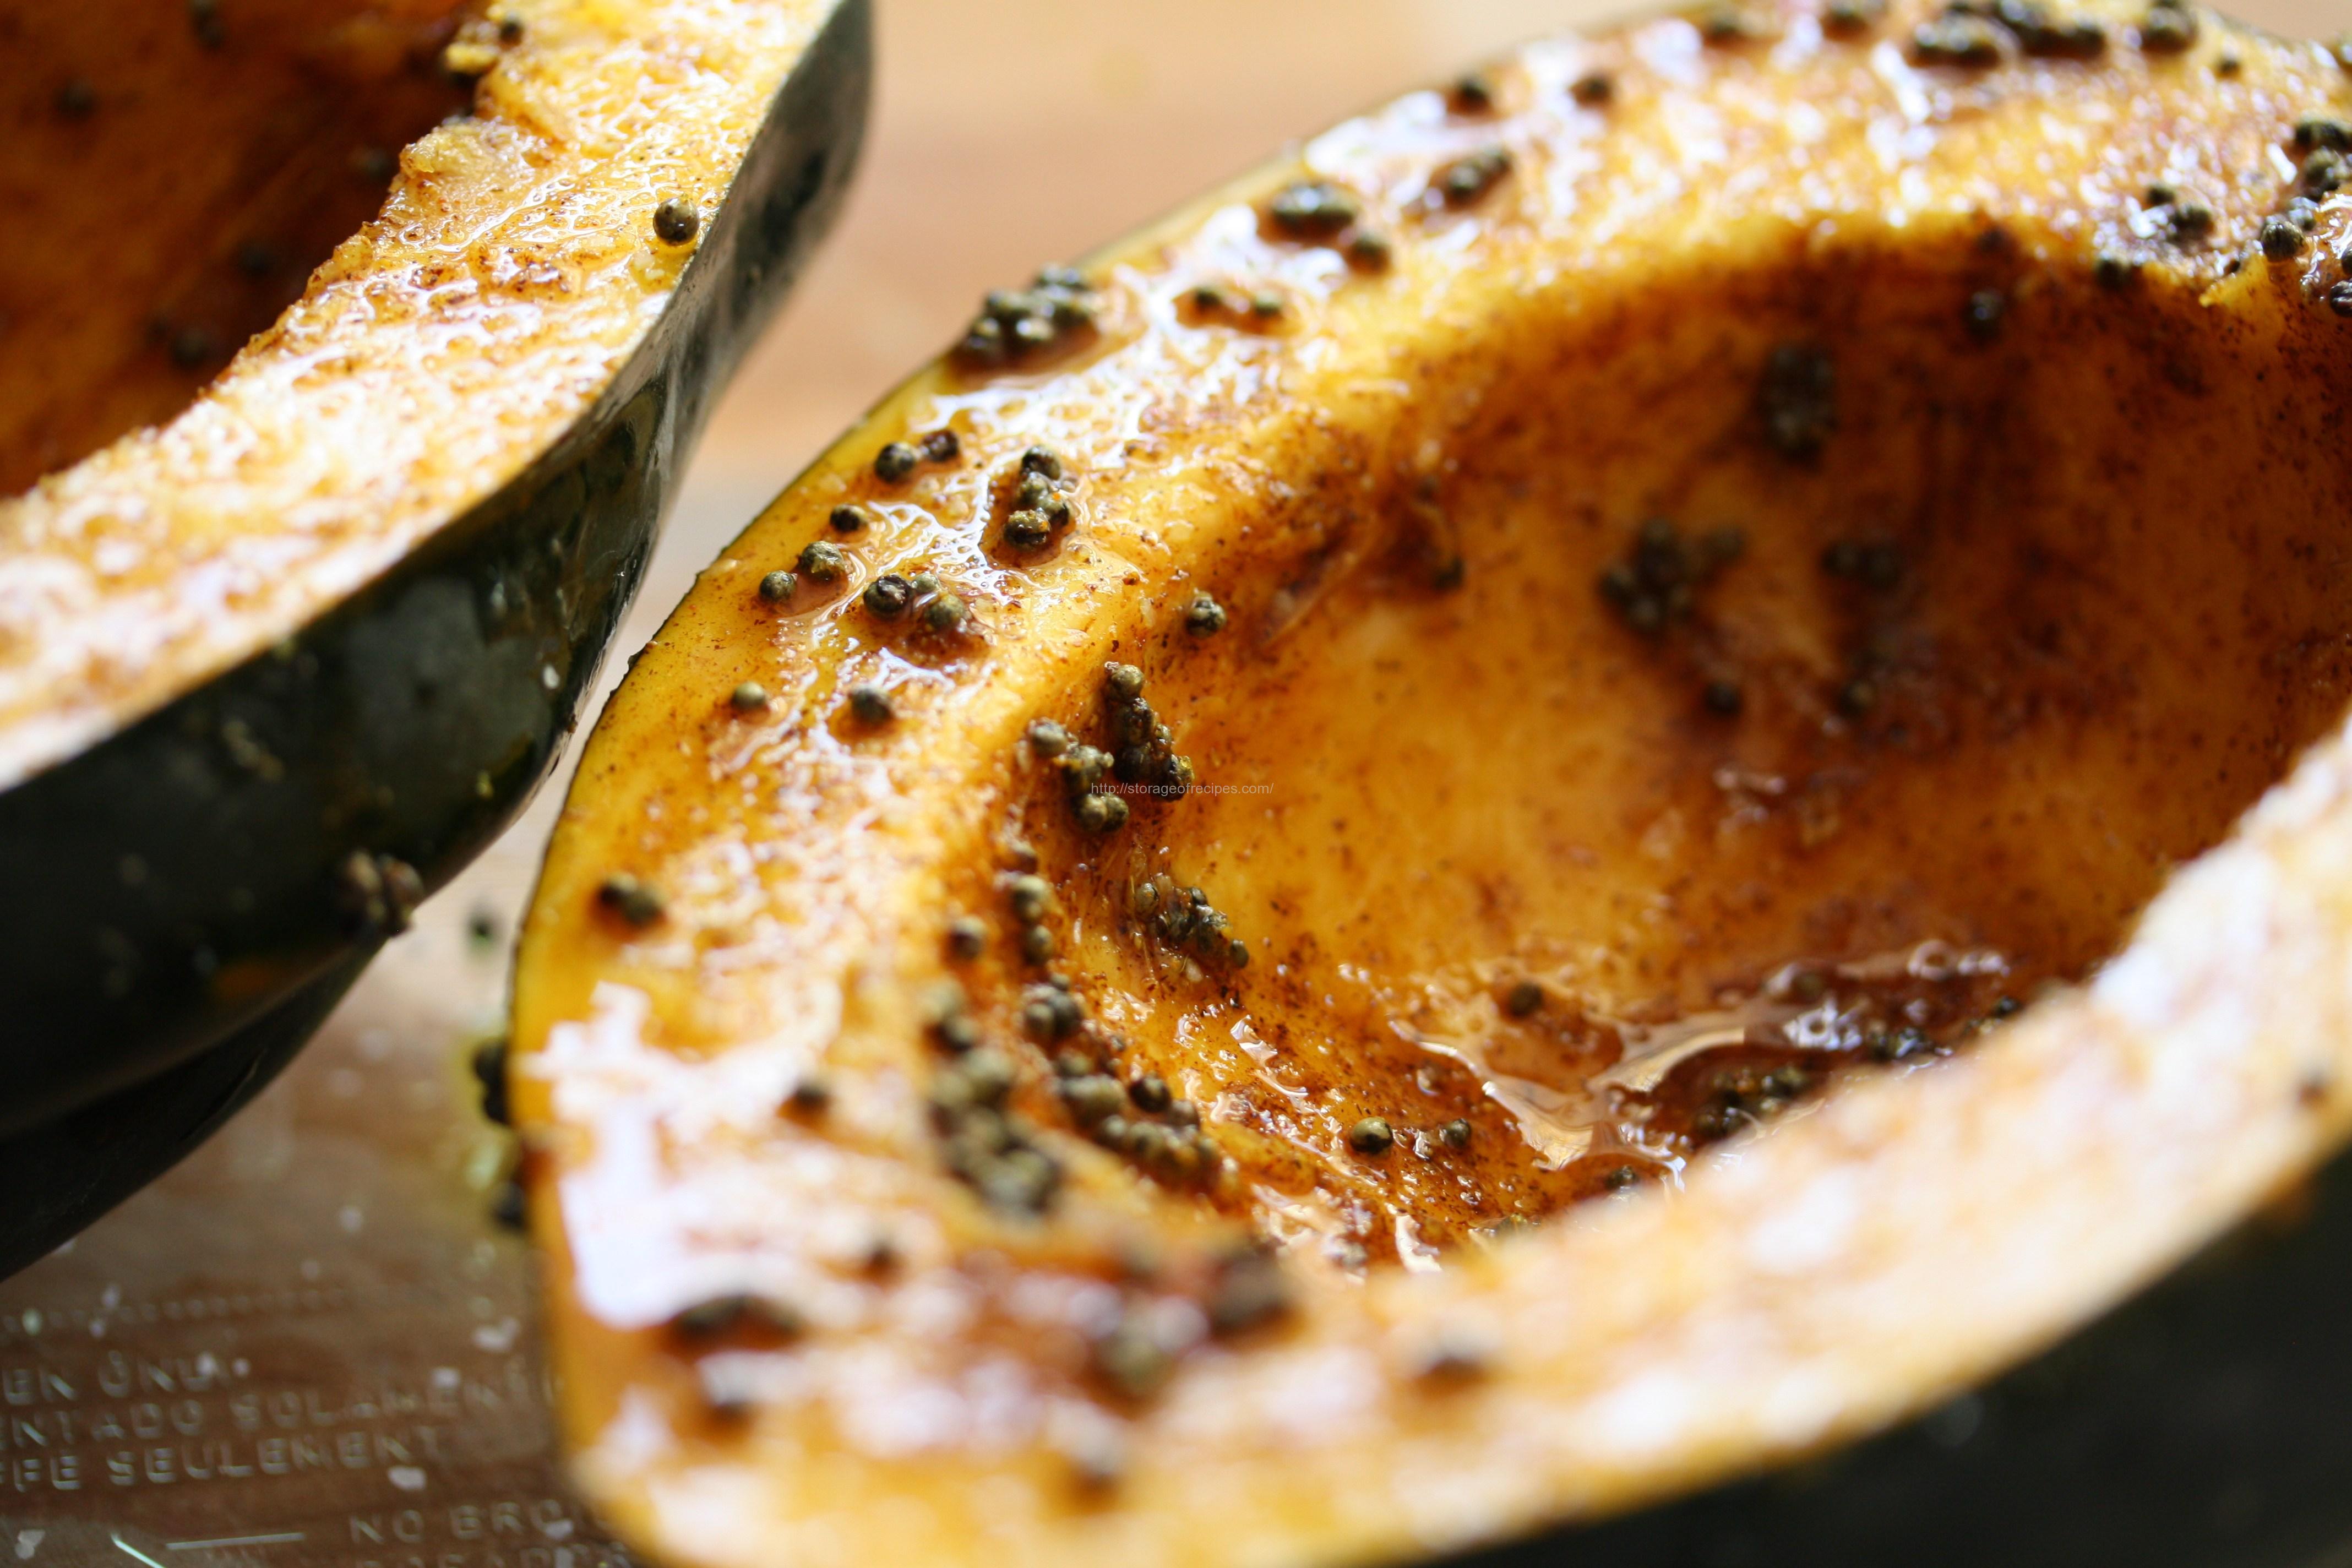 Baked acorn squash with cinnamon - Cooking Recipe